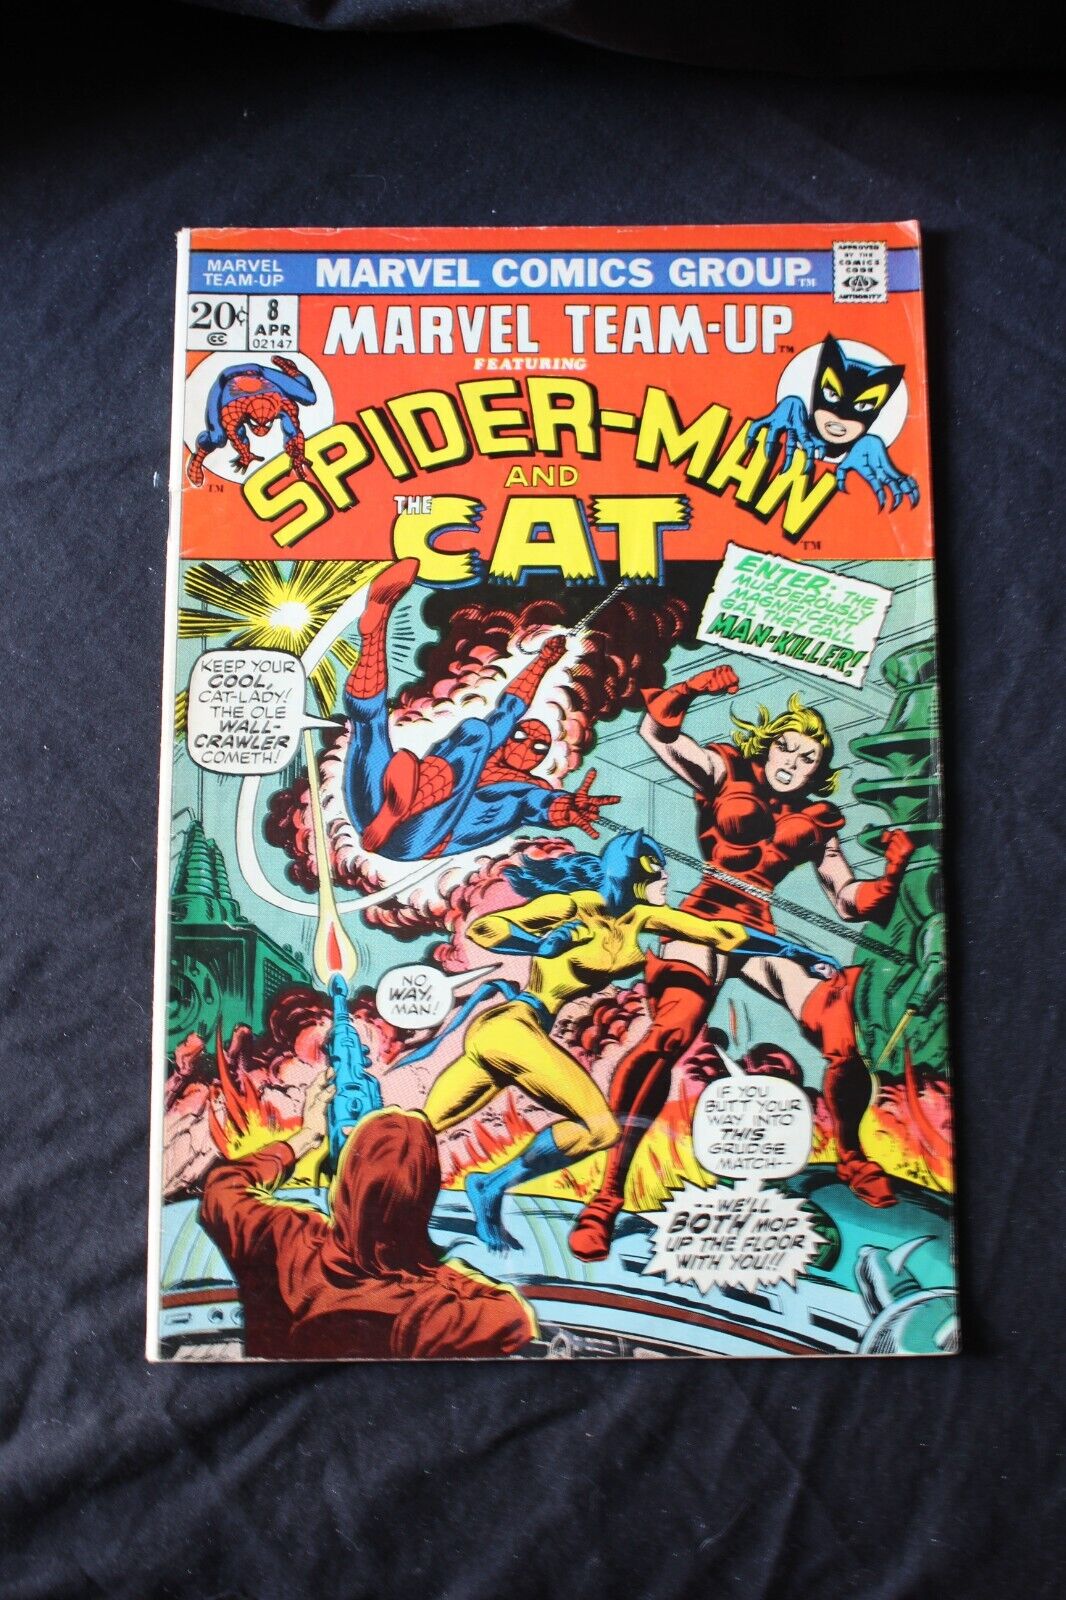 Marvel Team-Up #8, Good/Very Good -, 3.5 to 4.0, 1973, Spider-Man and The Cat